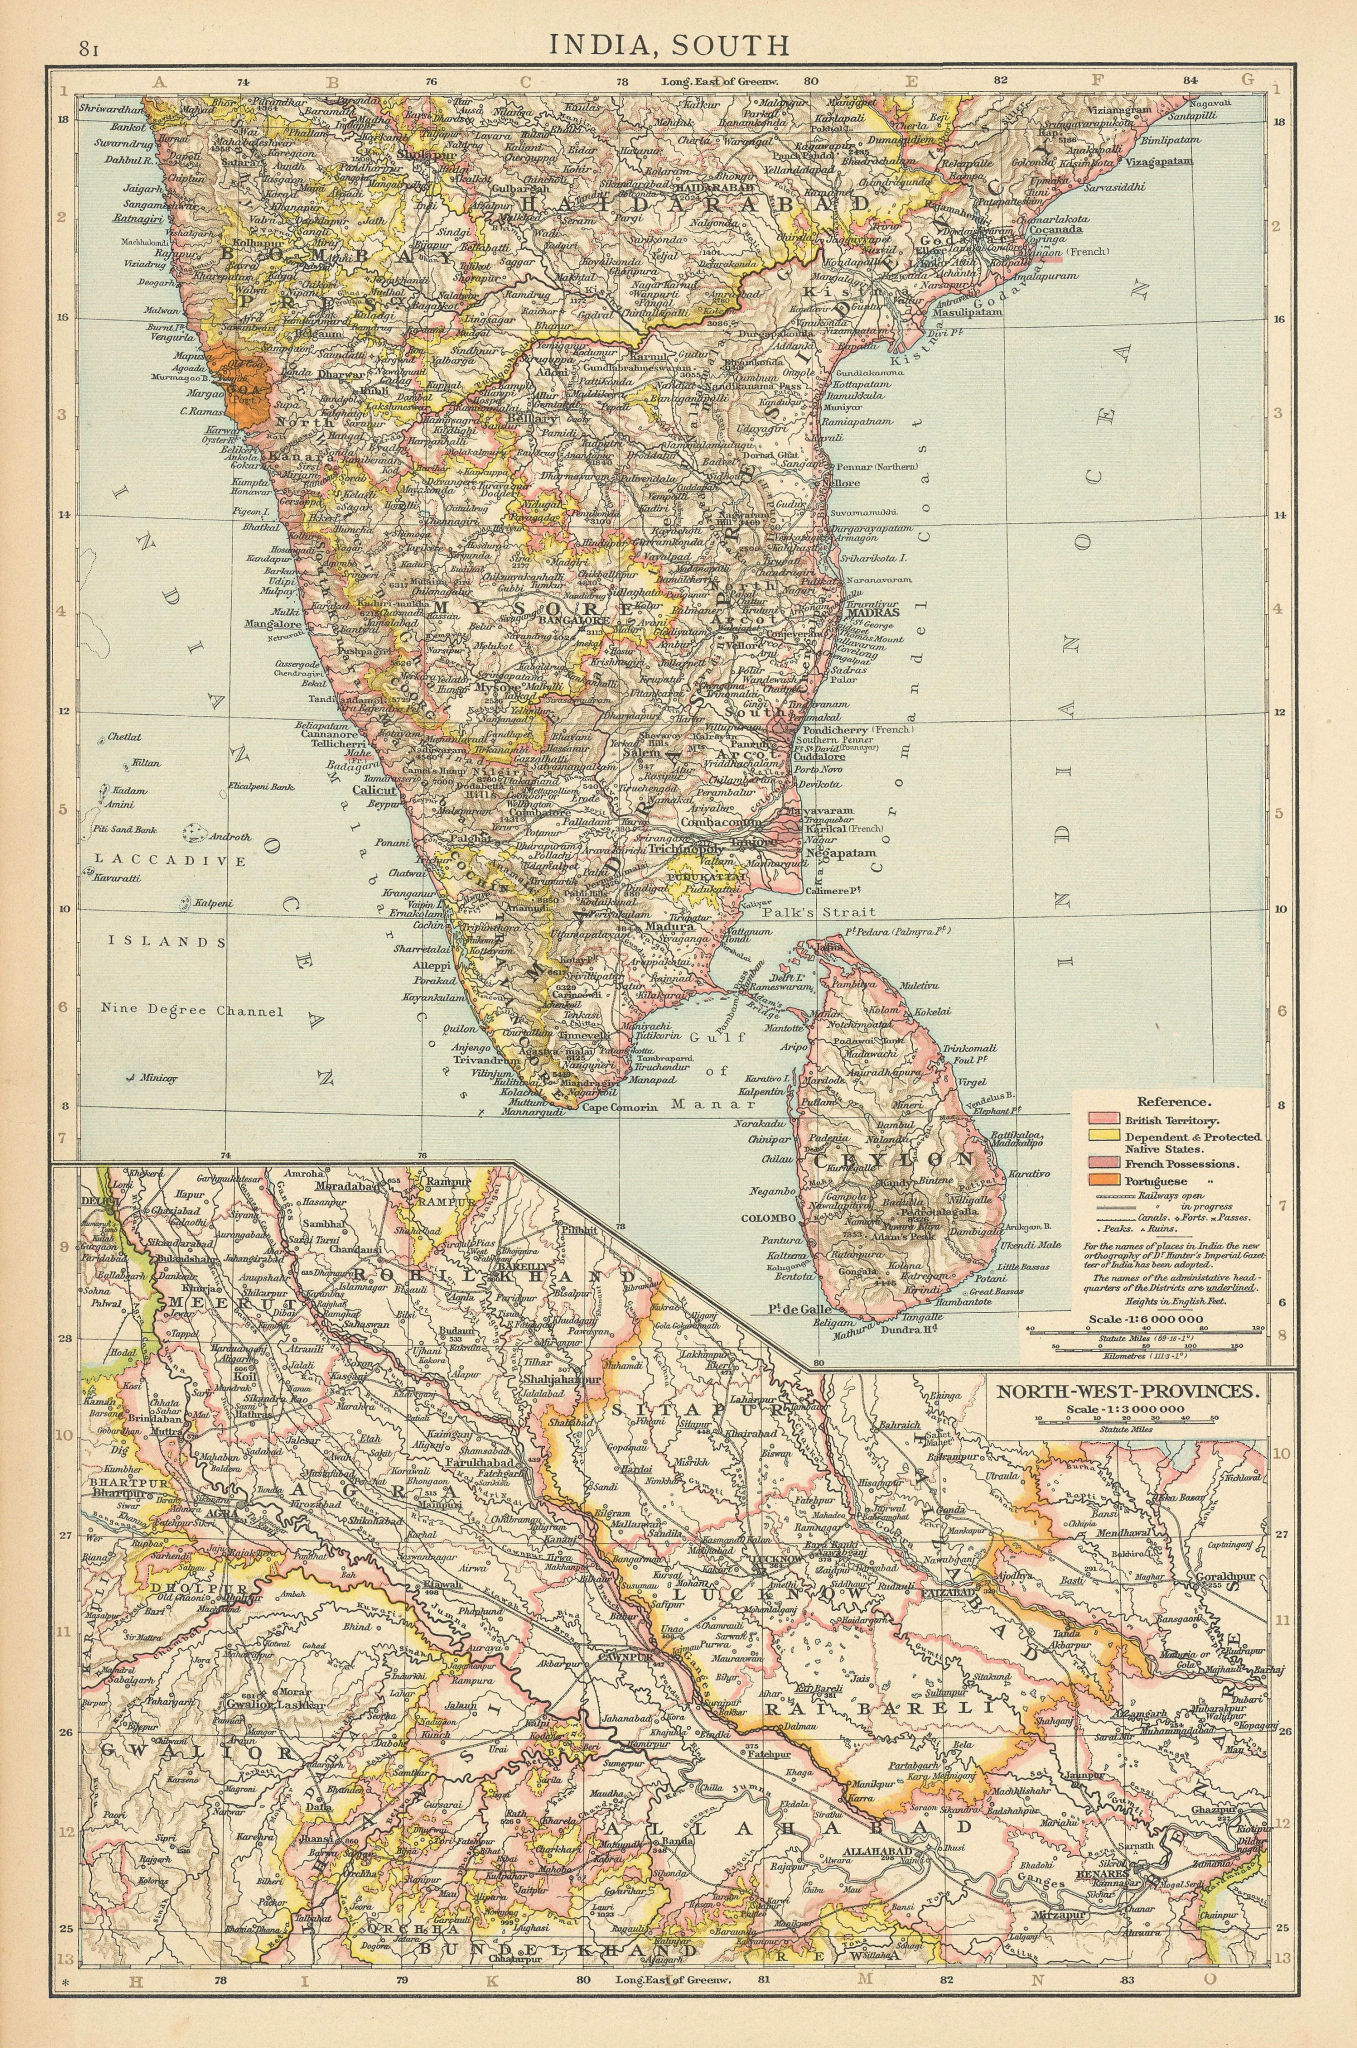 India South & North-west Provinces. Goa British French Portuguese TIMES 1895 map